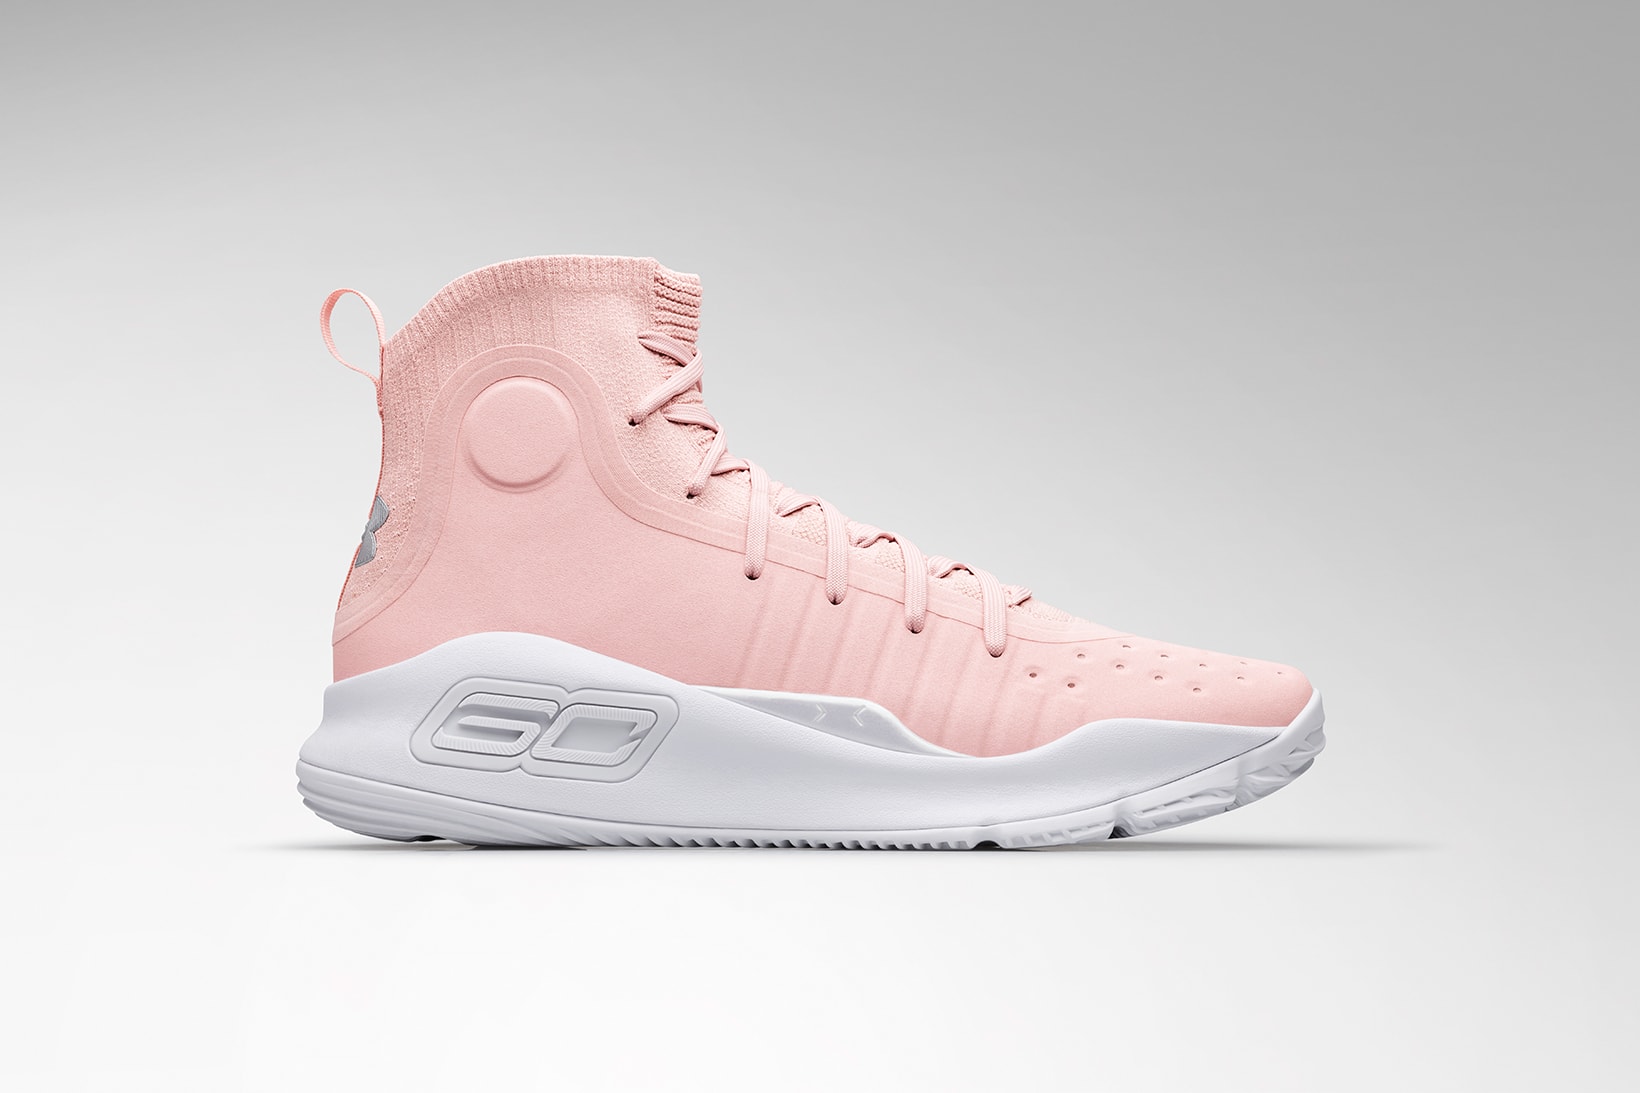 https://image-cdn.hypb.st/https%3A%2F%2Fhypebeast.com%2Fimage%2F2018%2F02%2Funder-armour-curry-4-flushed-pink-2.jpg?cbr=1&q=90